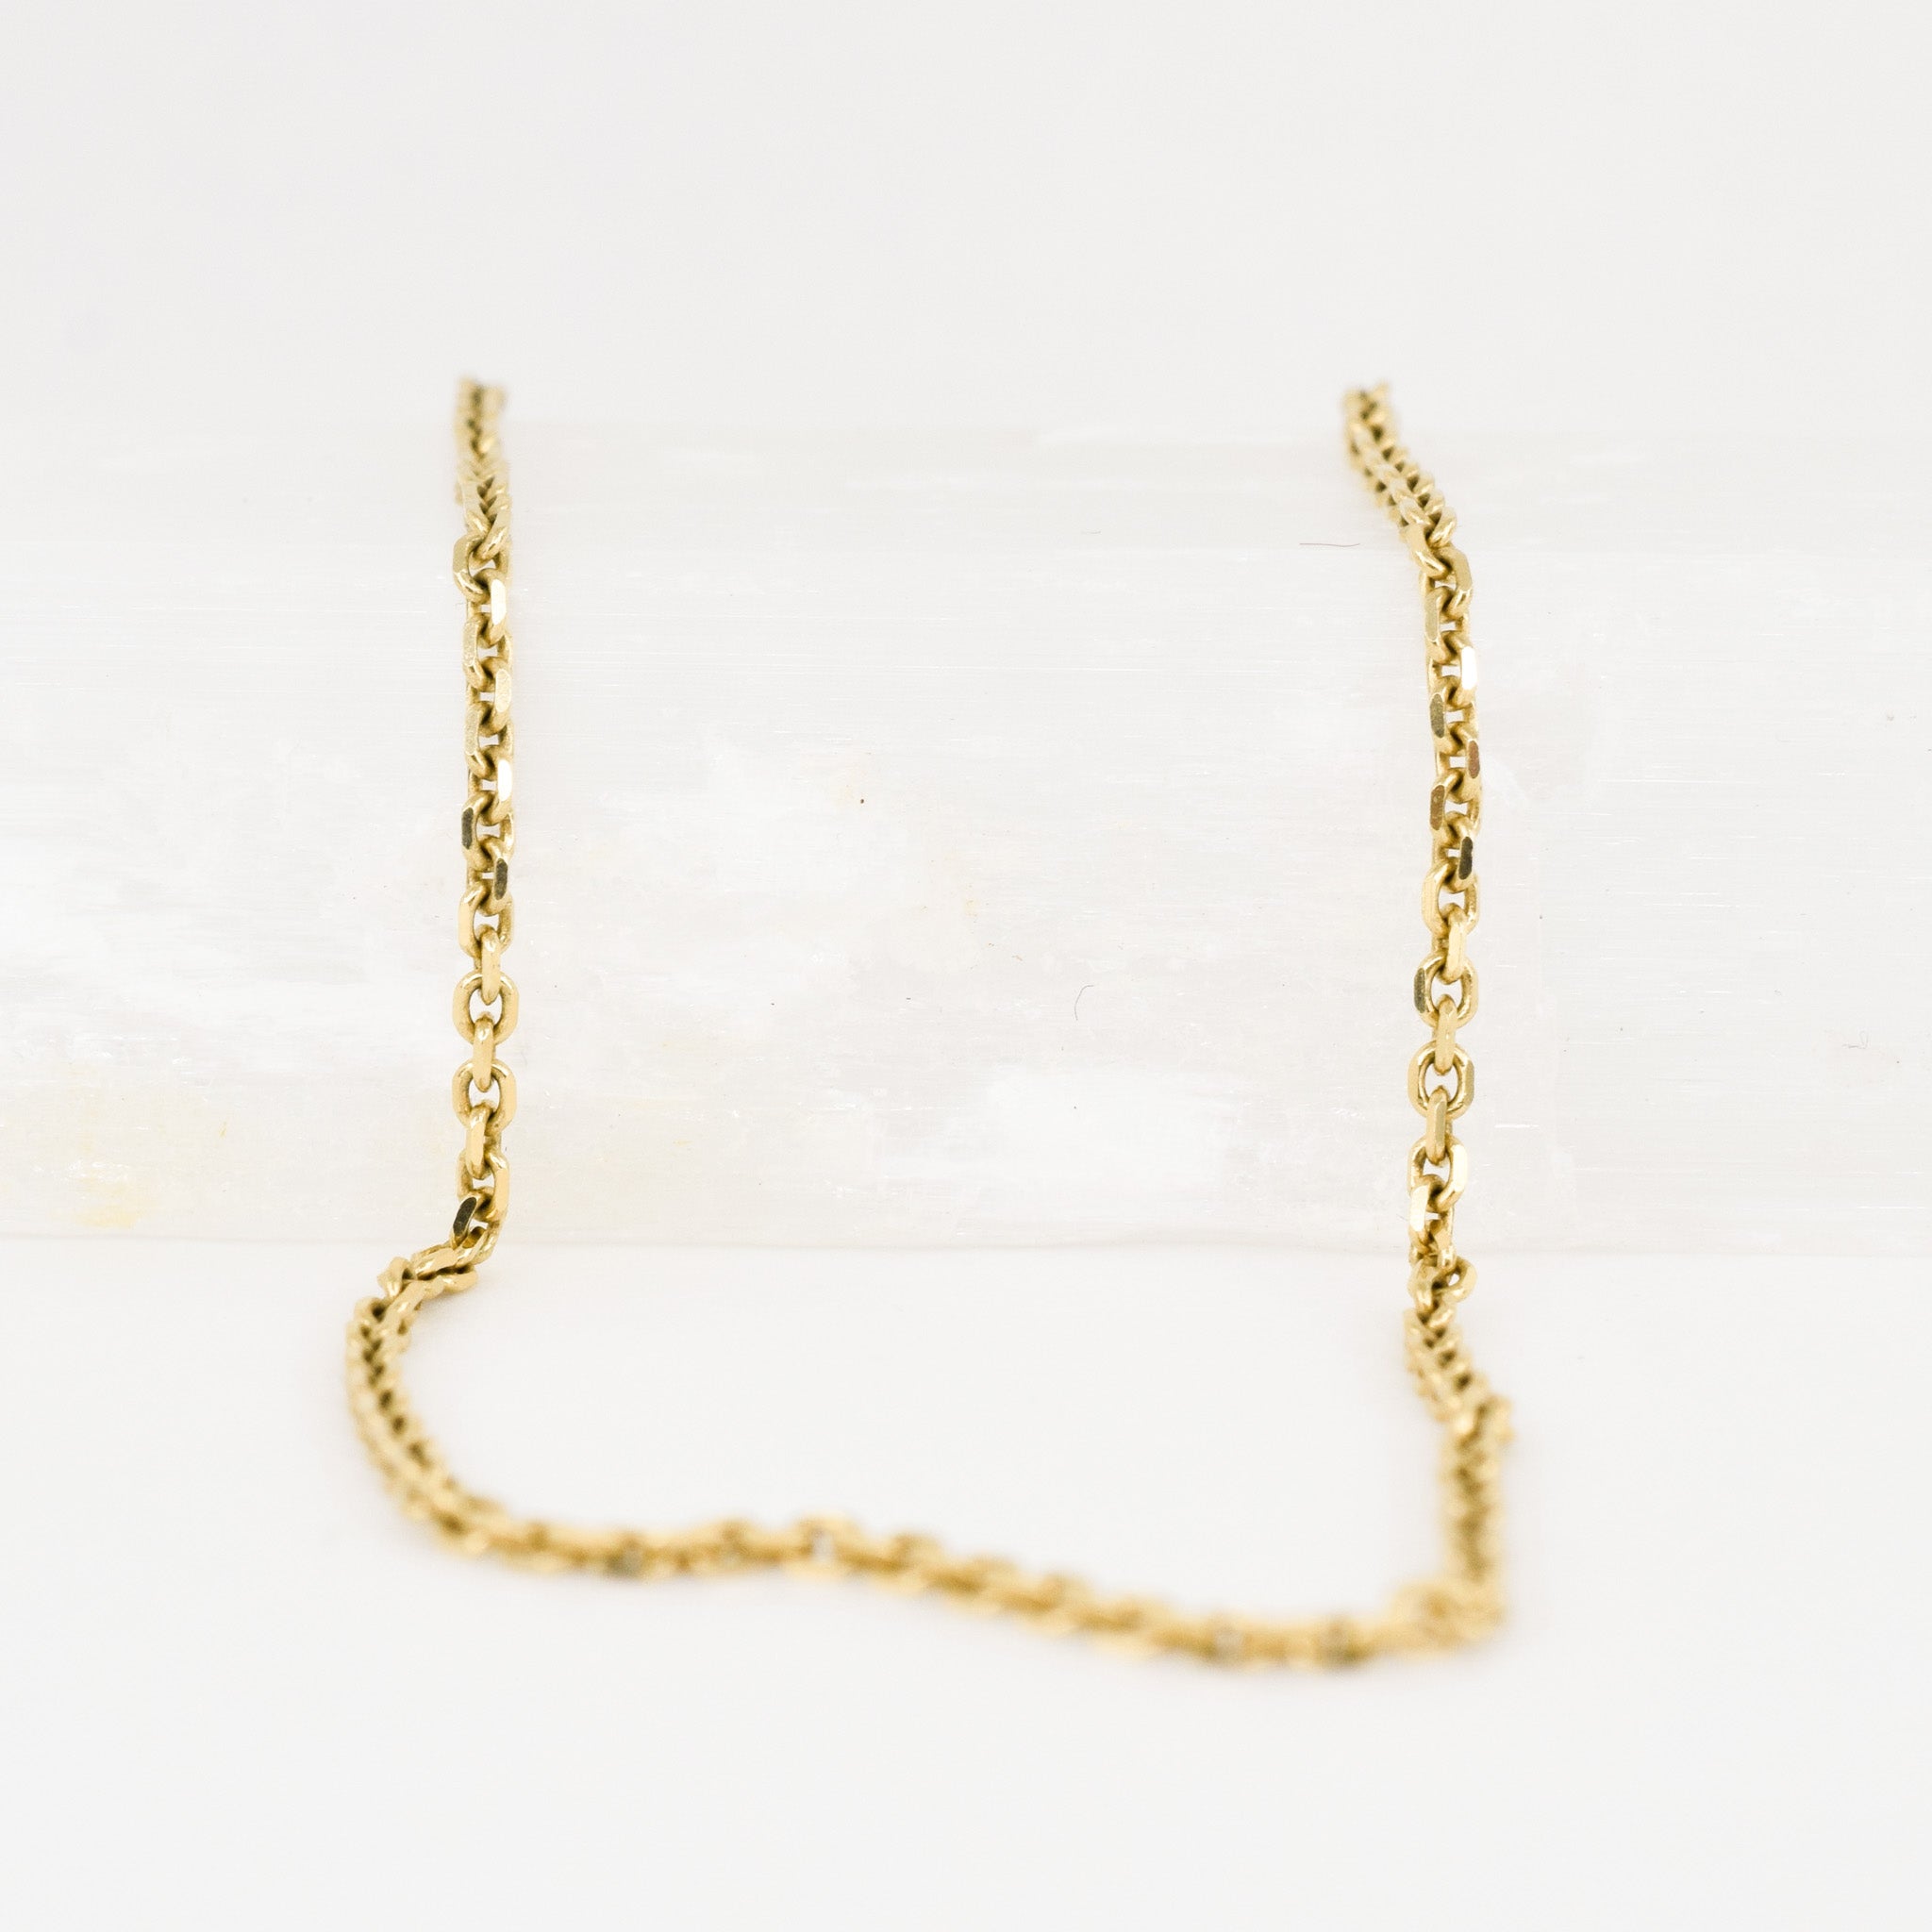 vintage gold cable link chain, folklor vintage jewelry canada